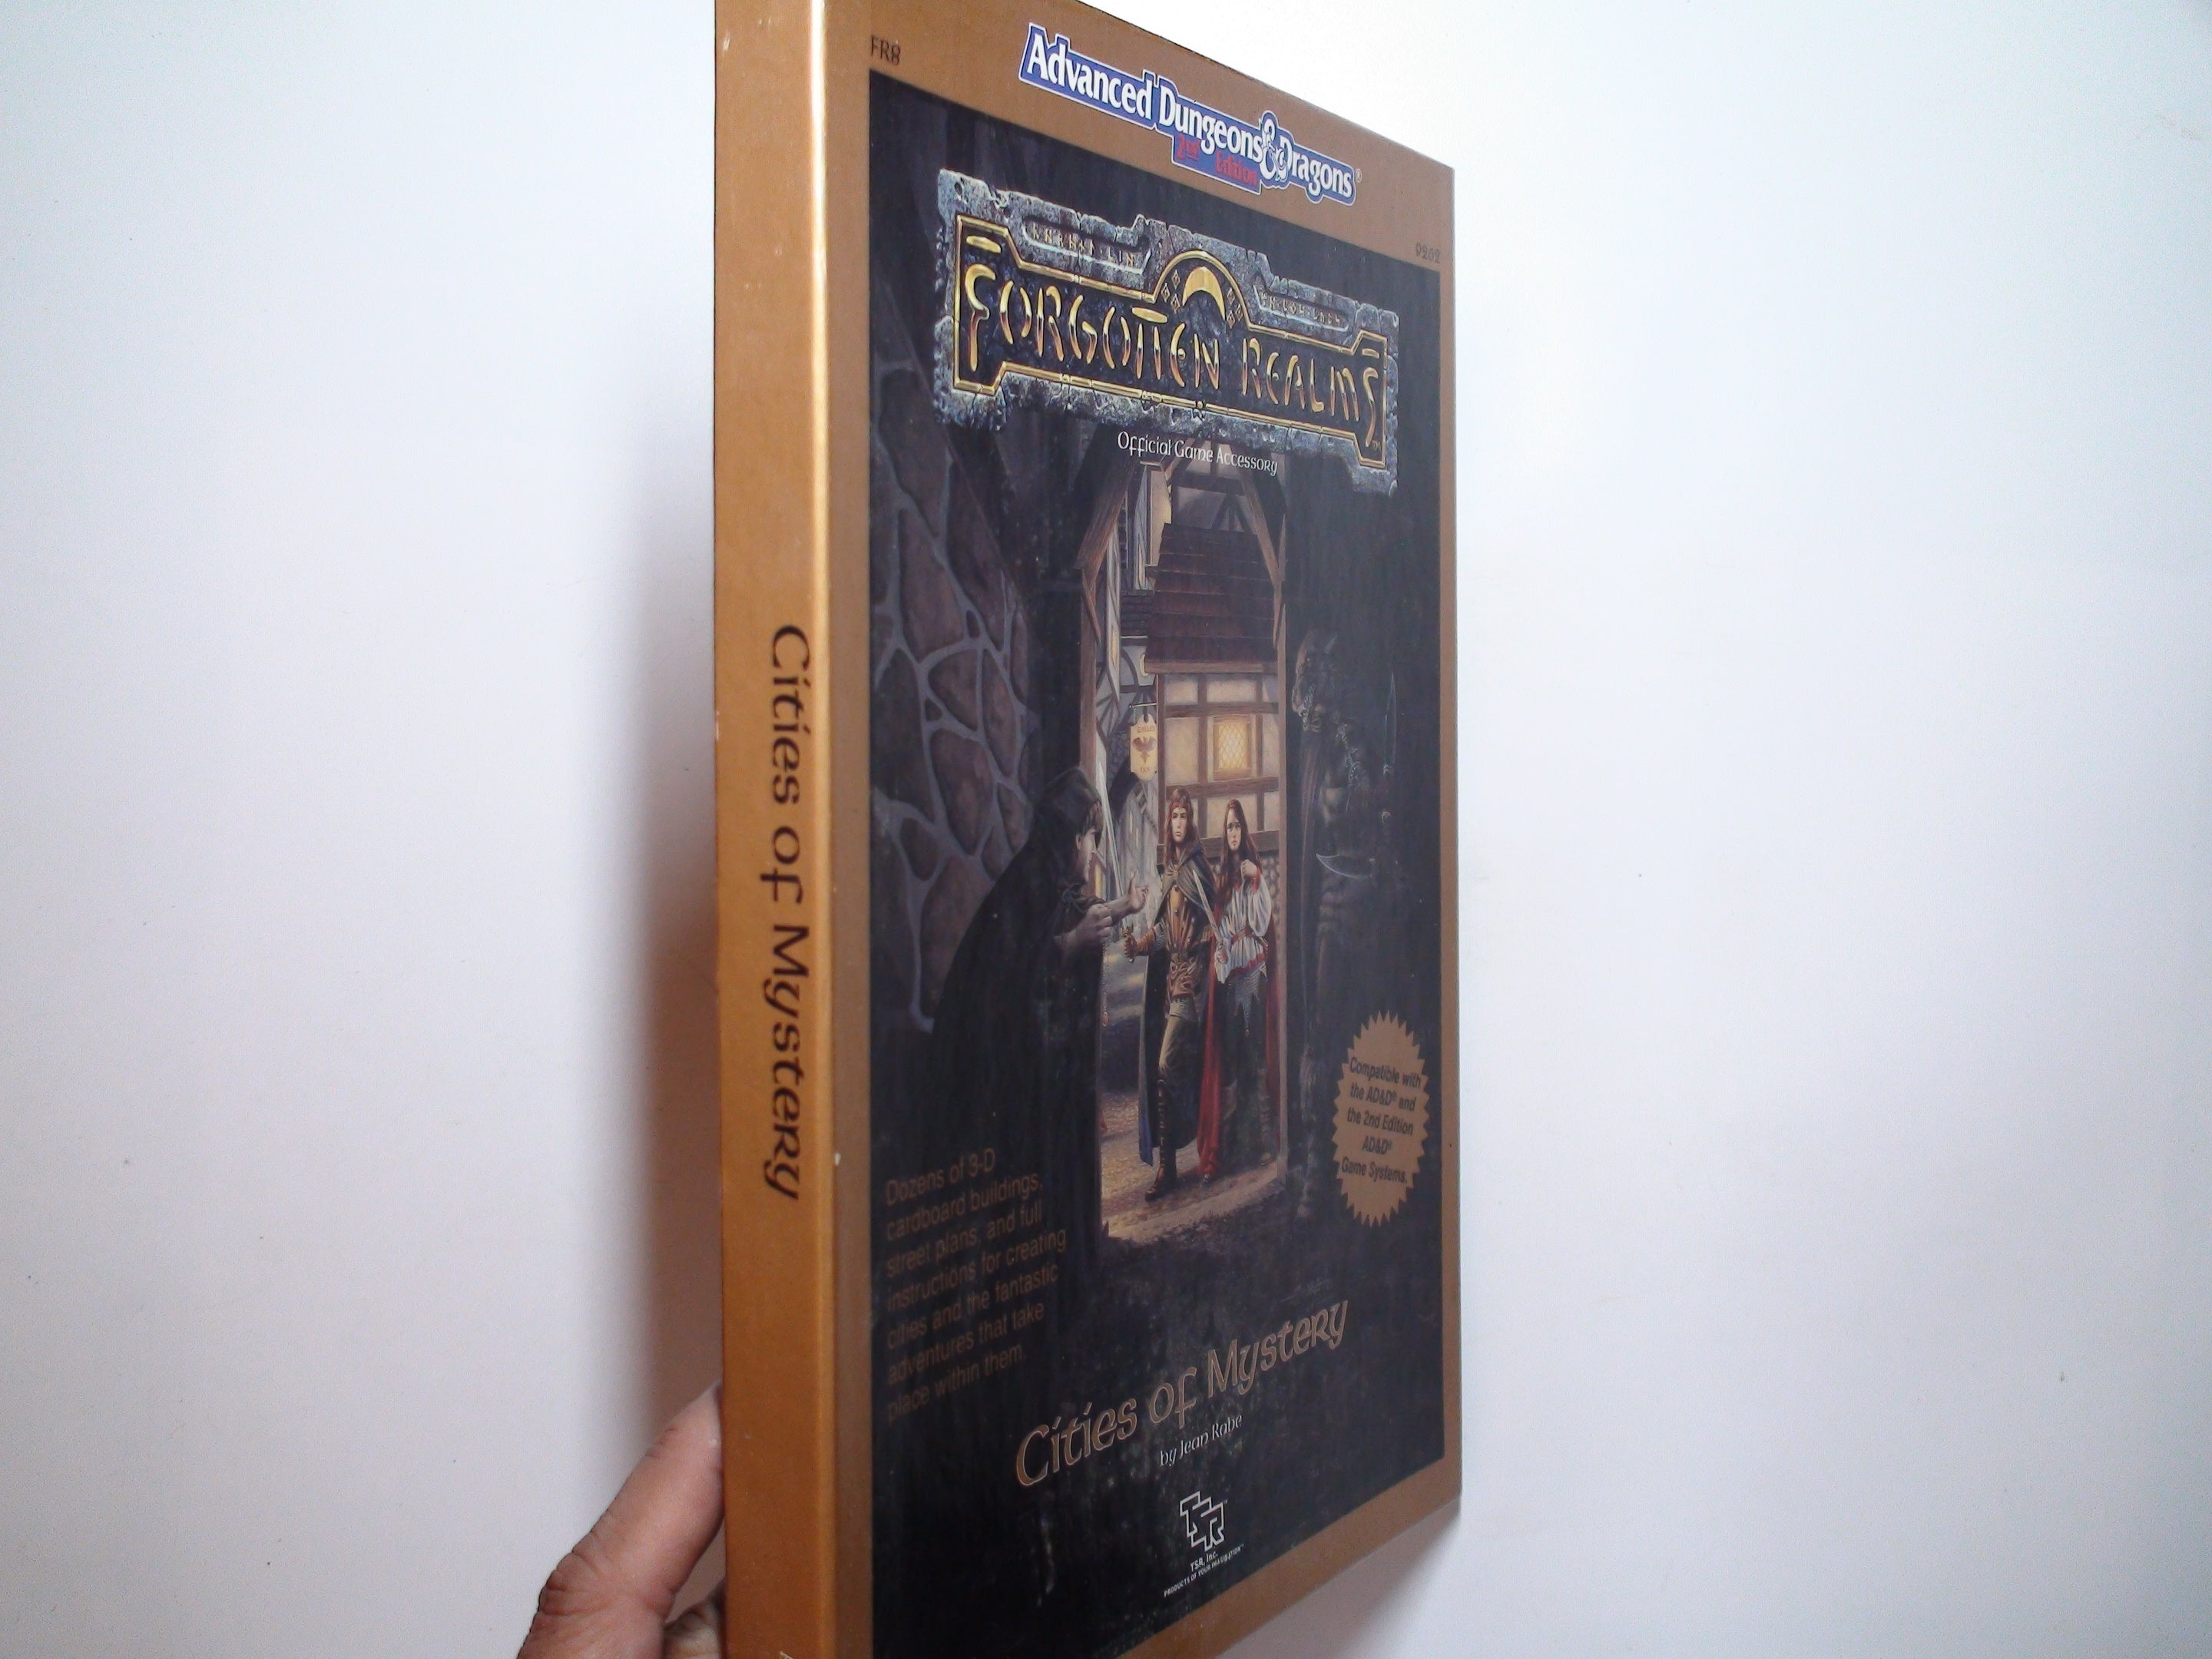 Forgotten Realms, Cities of Mystery, In Box, TSR AD&D FR8 #9262, 1989